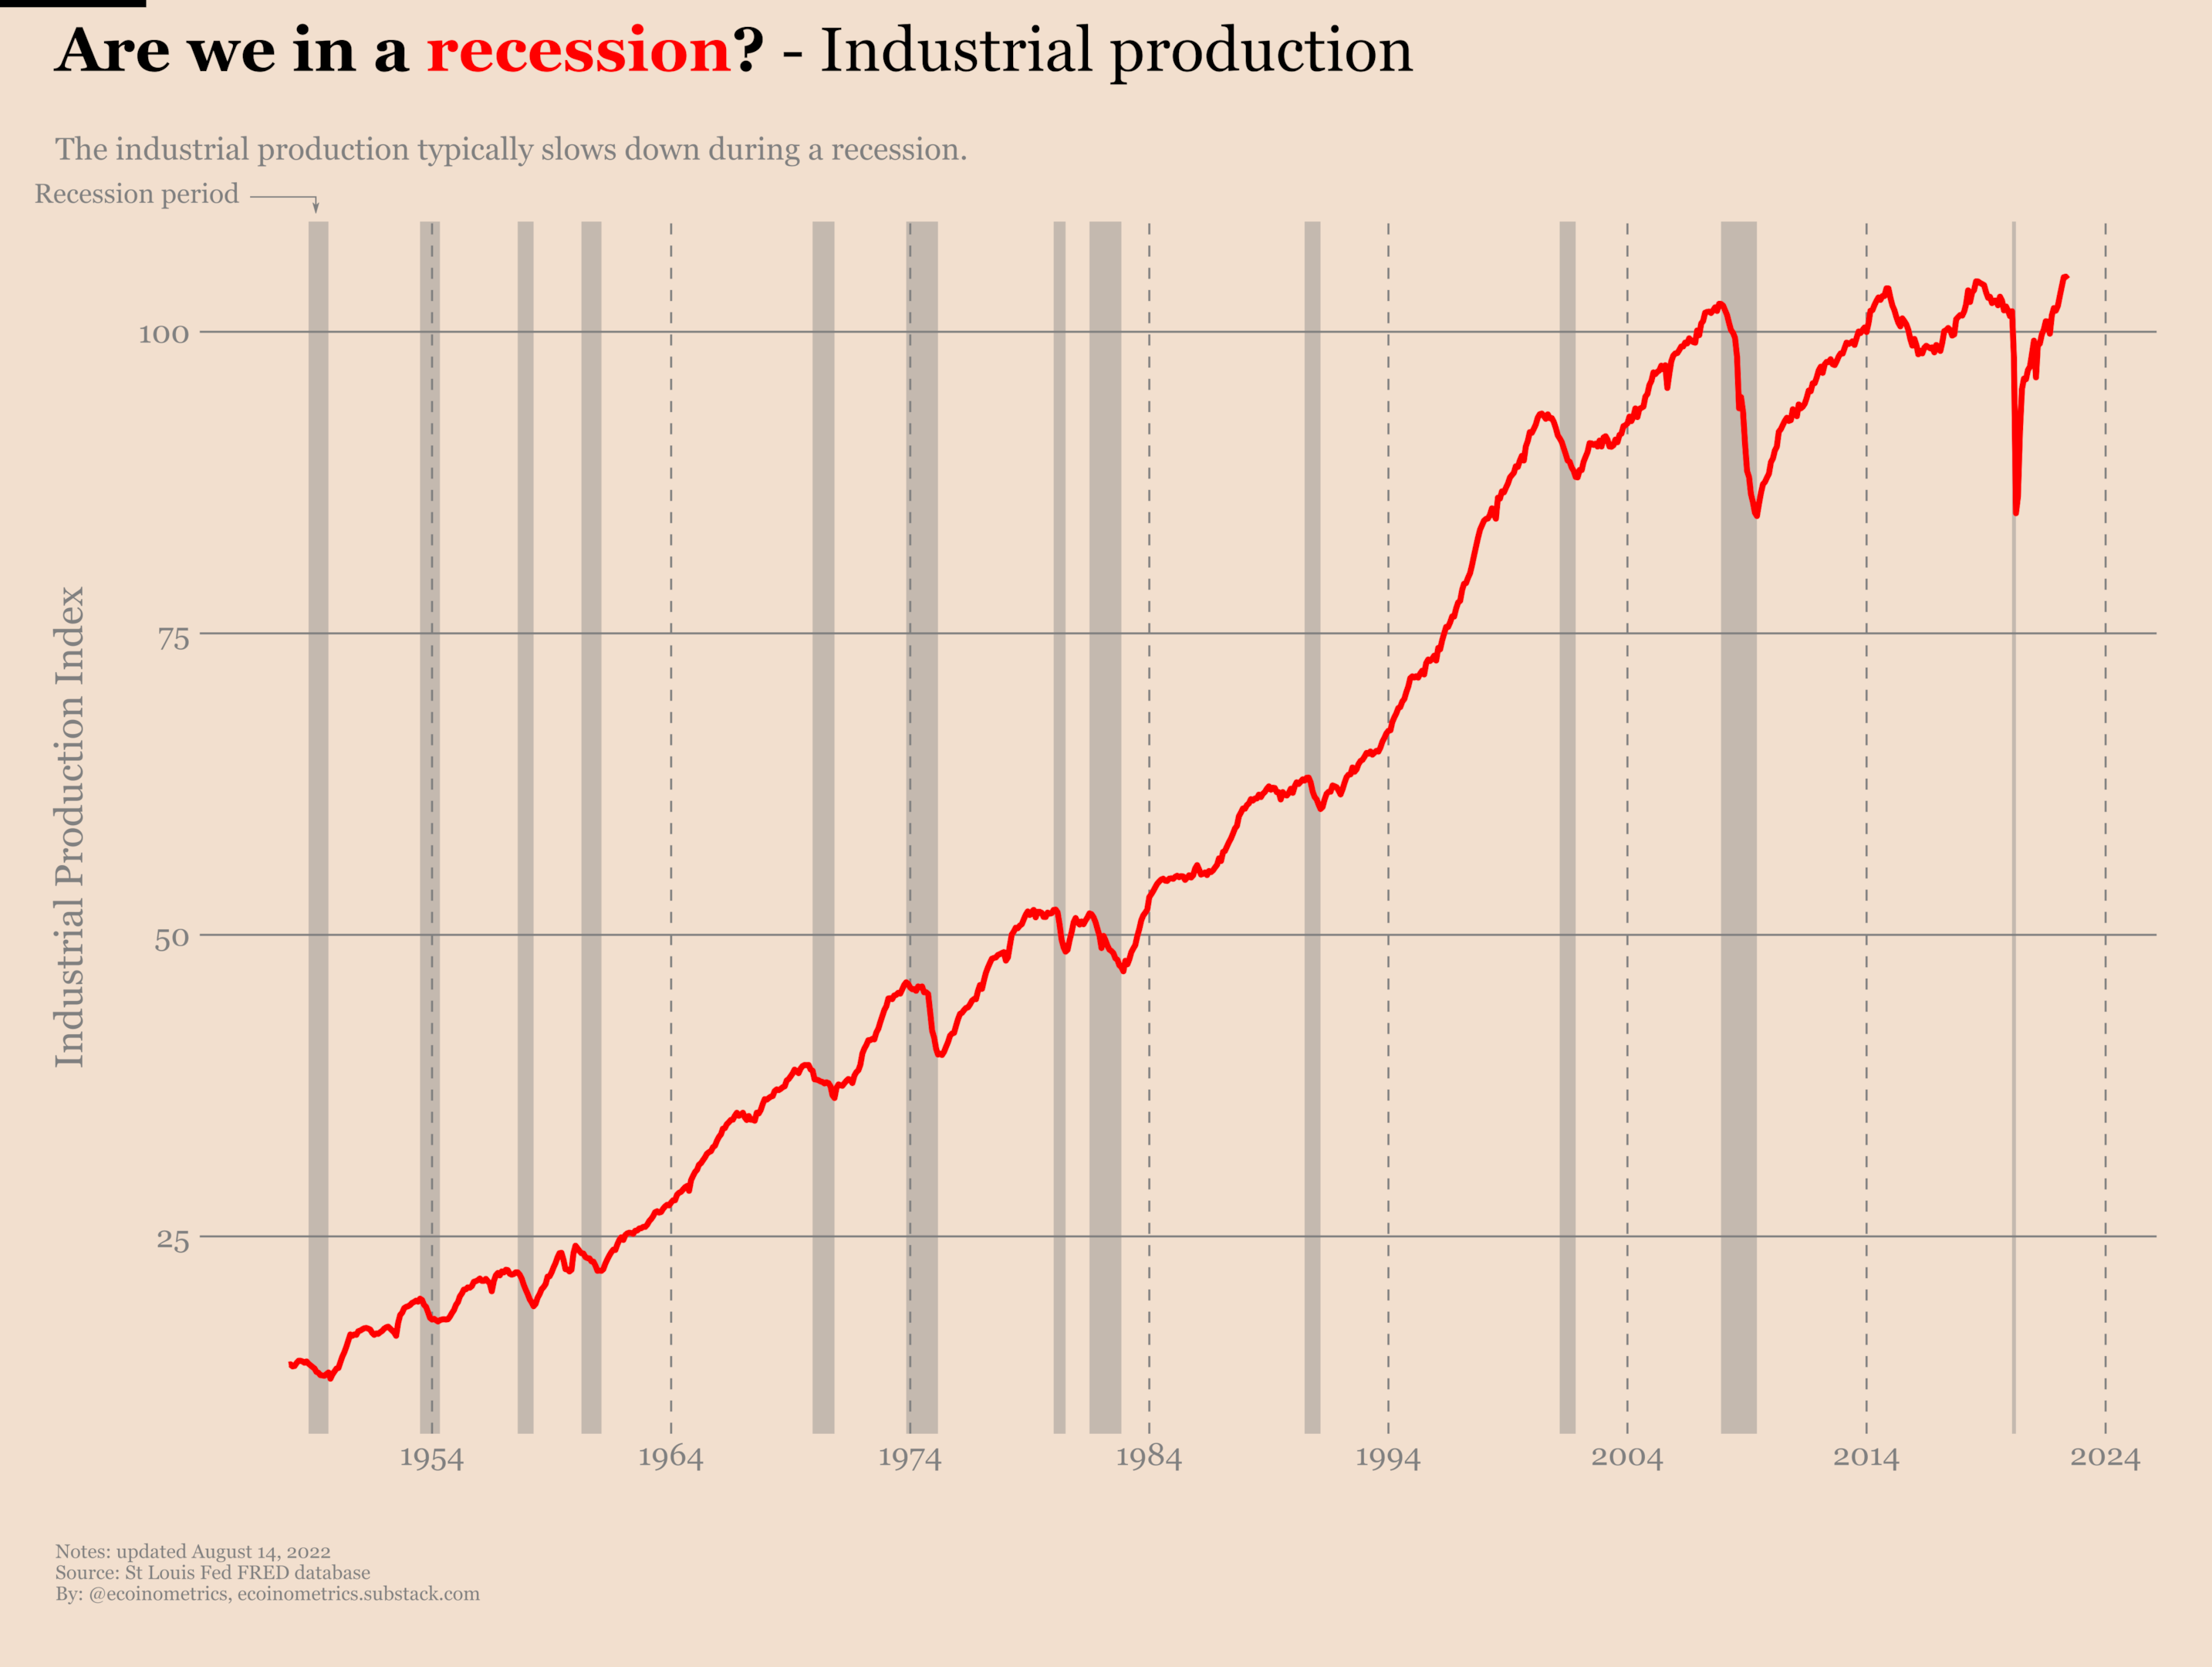 Evolution of the industrial production with highlighted past recessions.